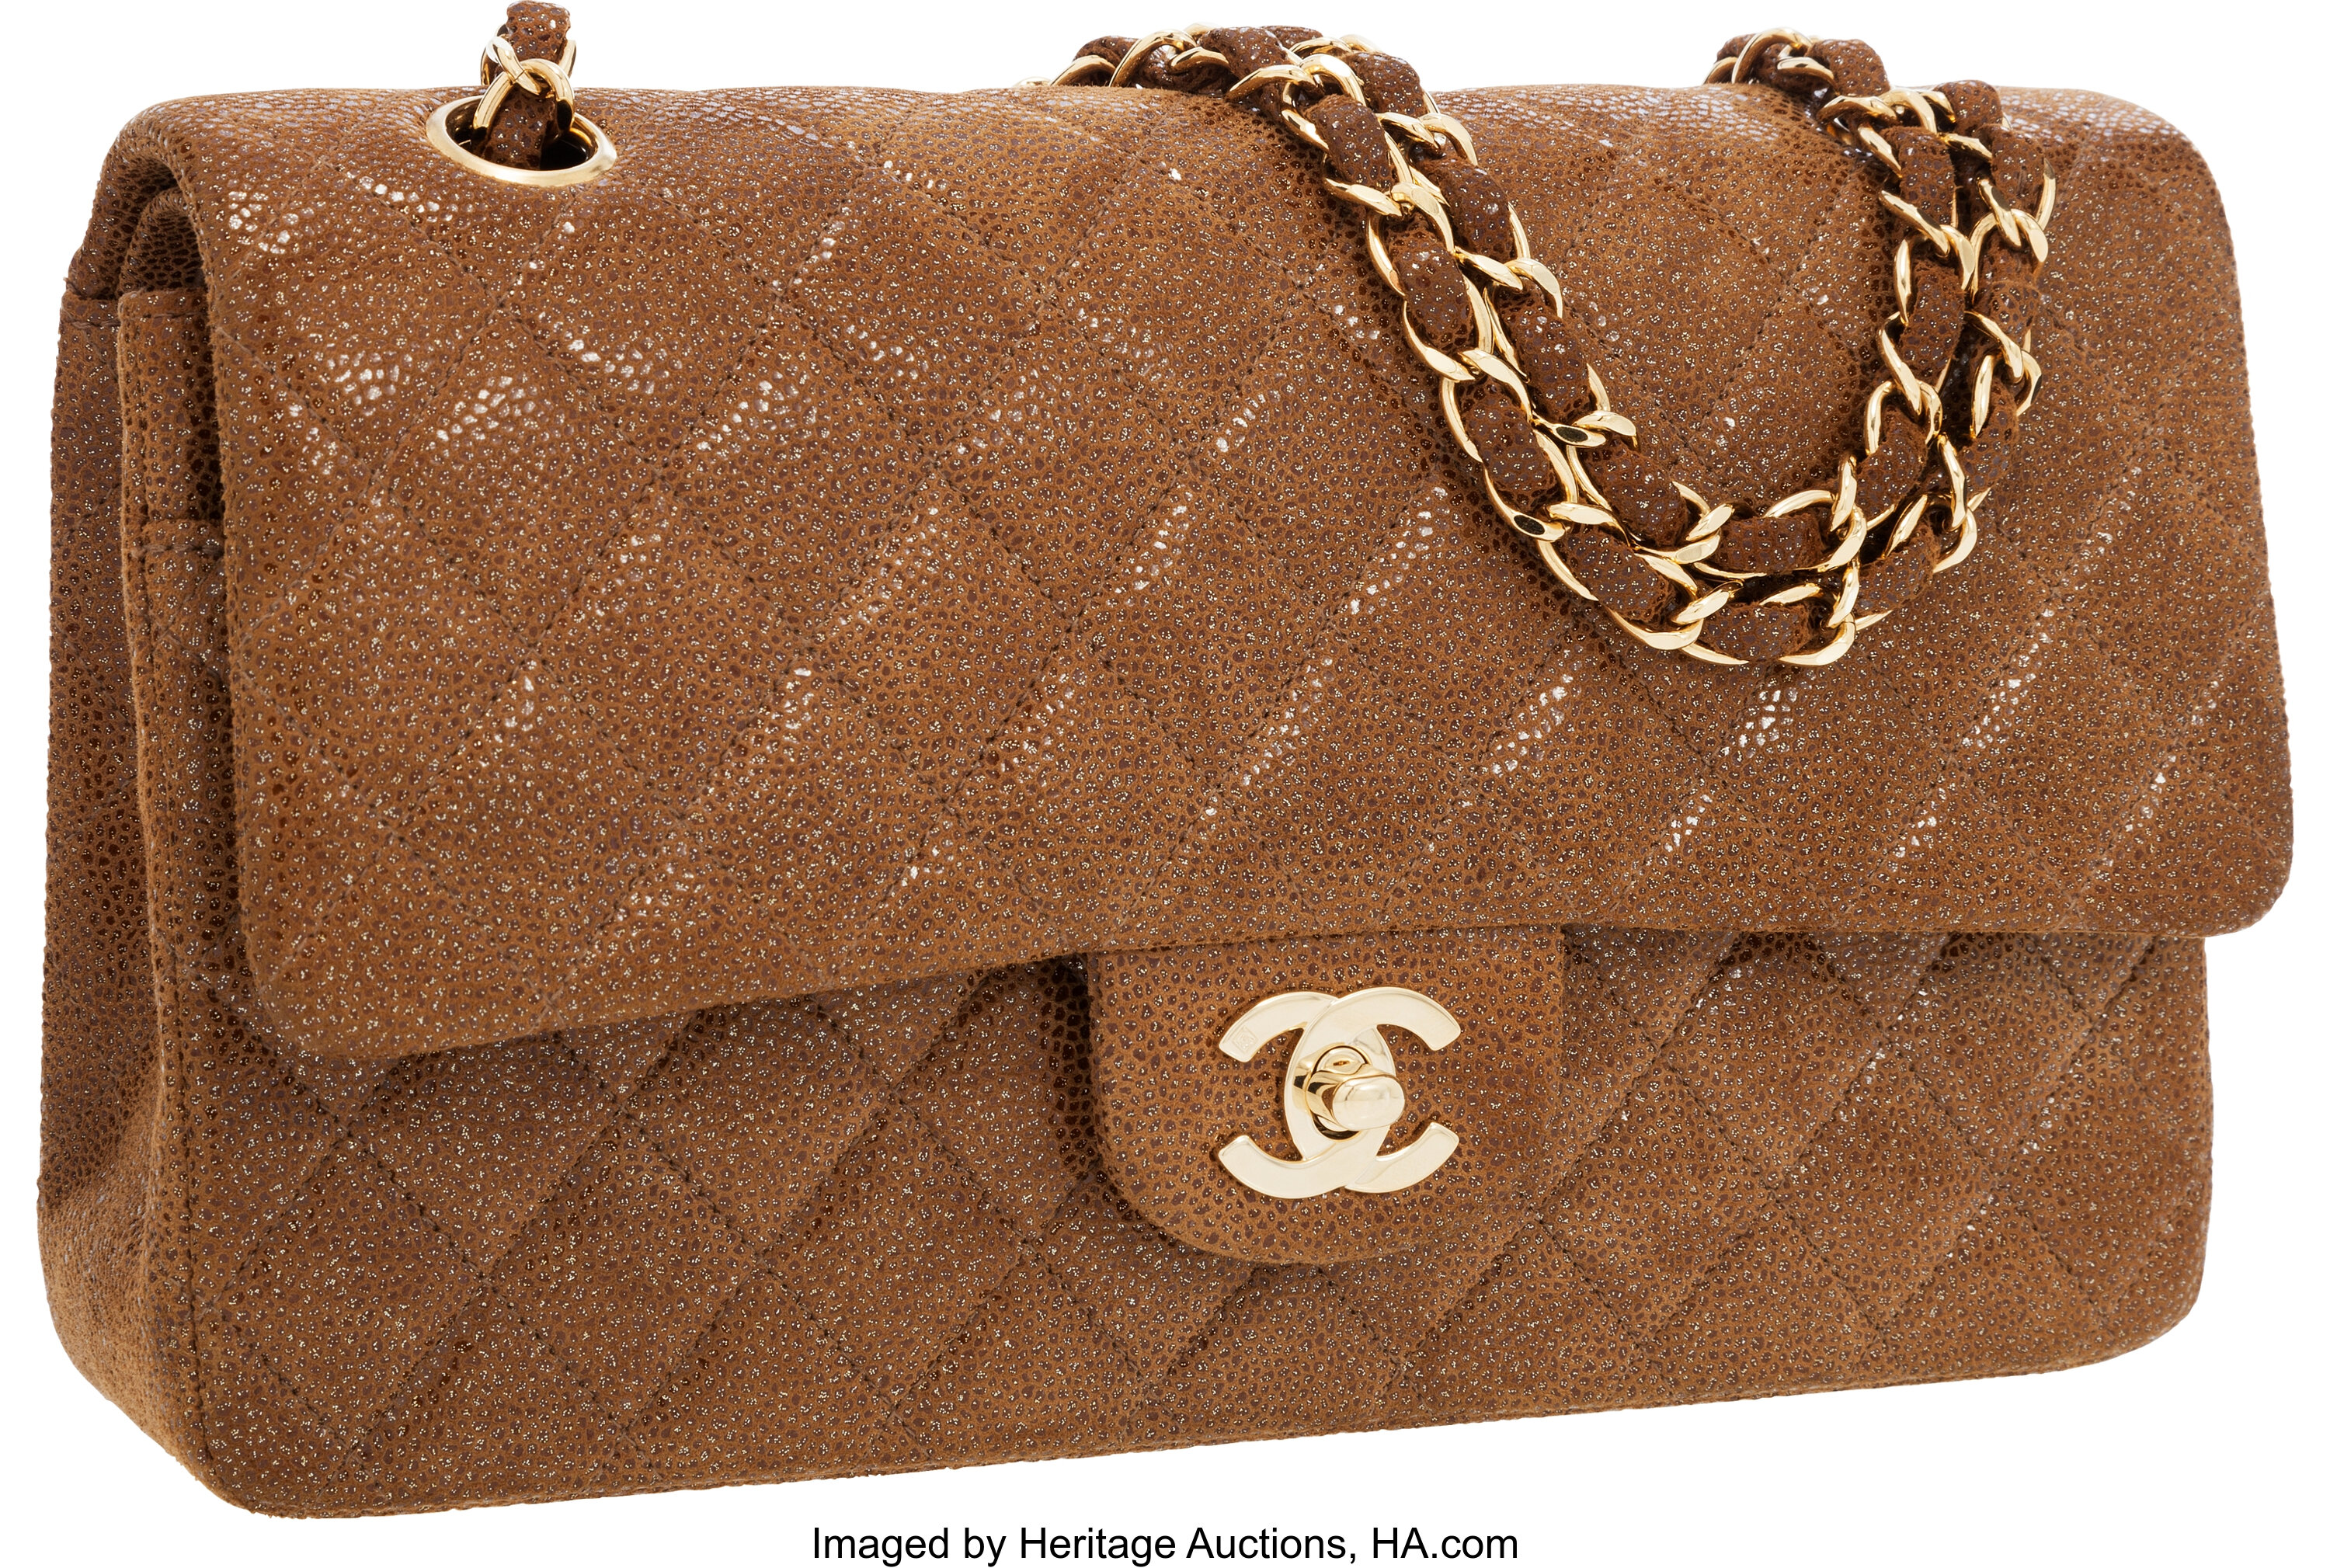 Chanel Light Brown Caviar Suede Leather Medium Double Flap Bag with, Lot # 56269